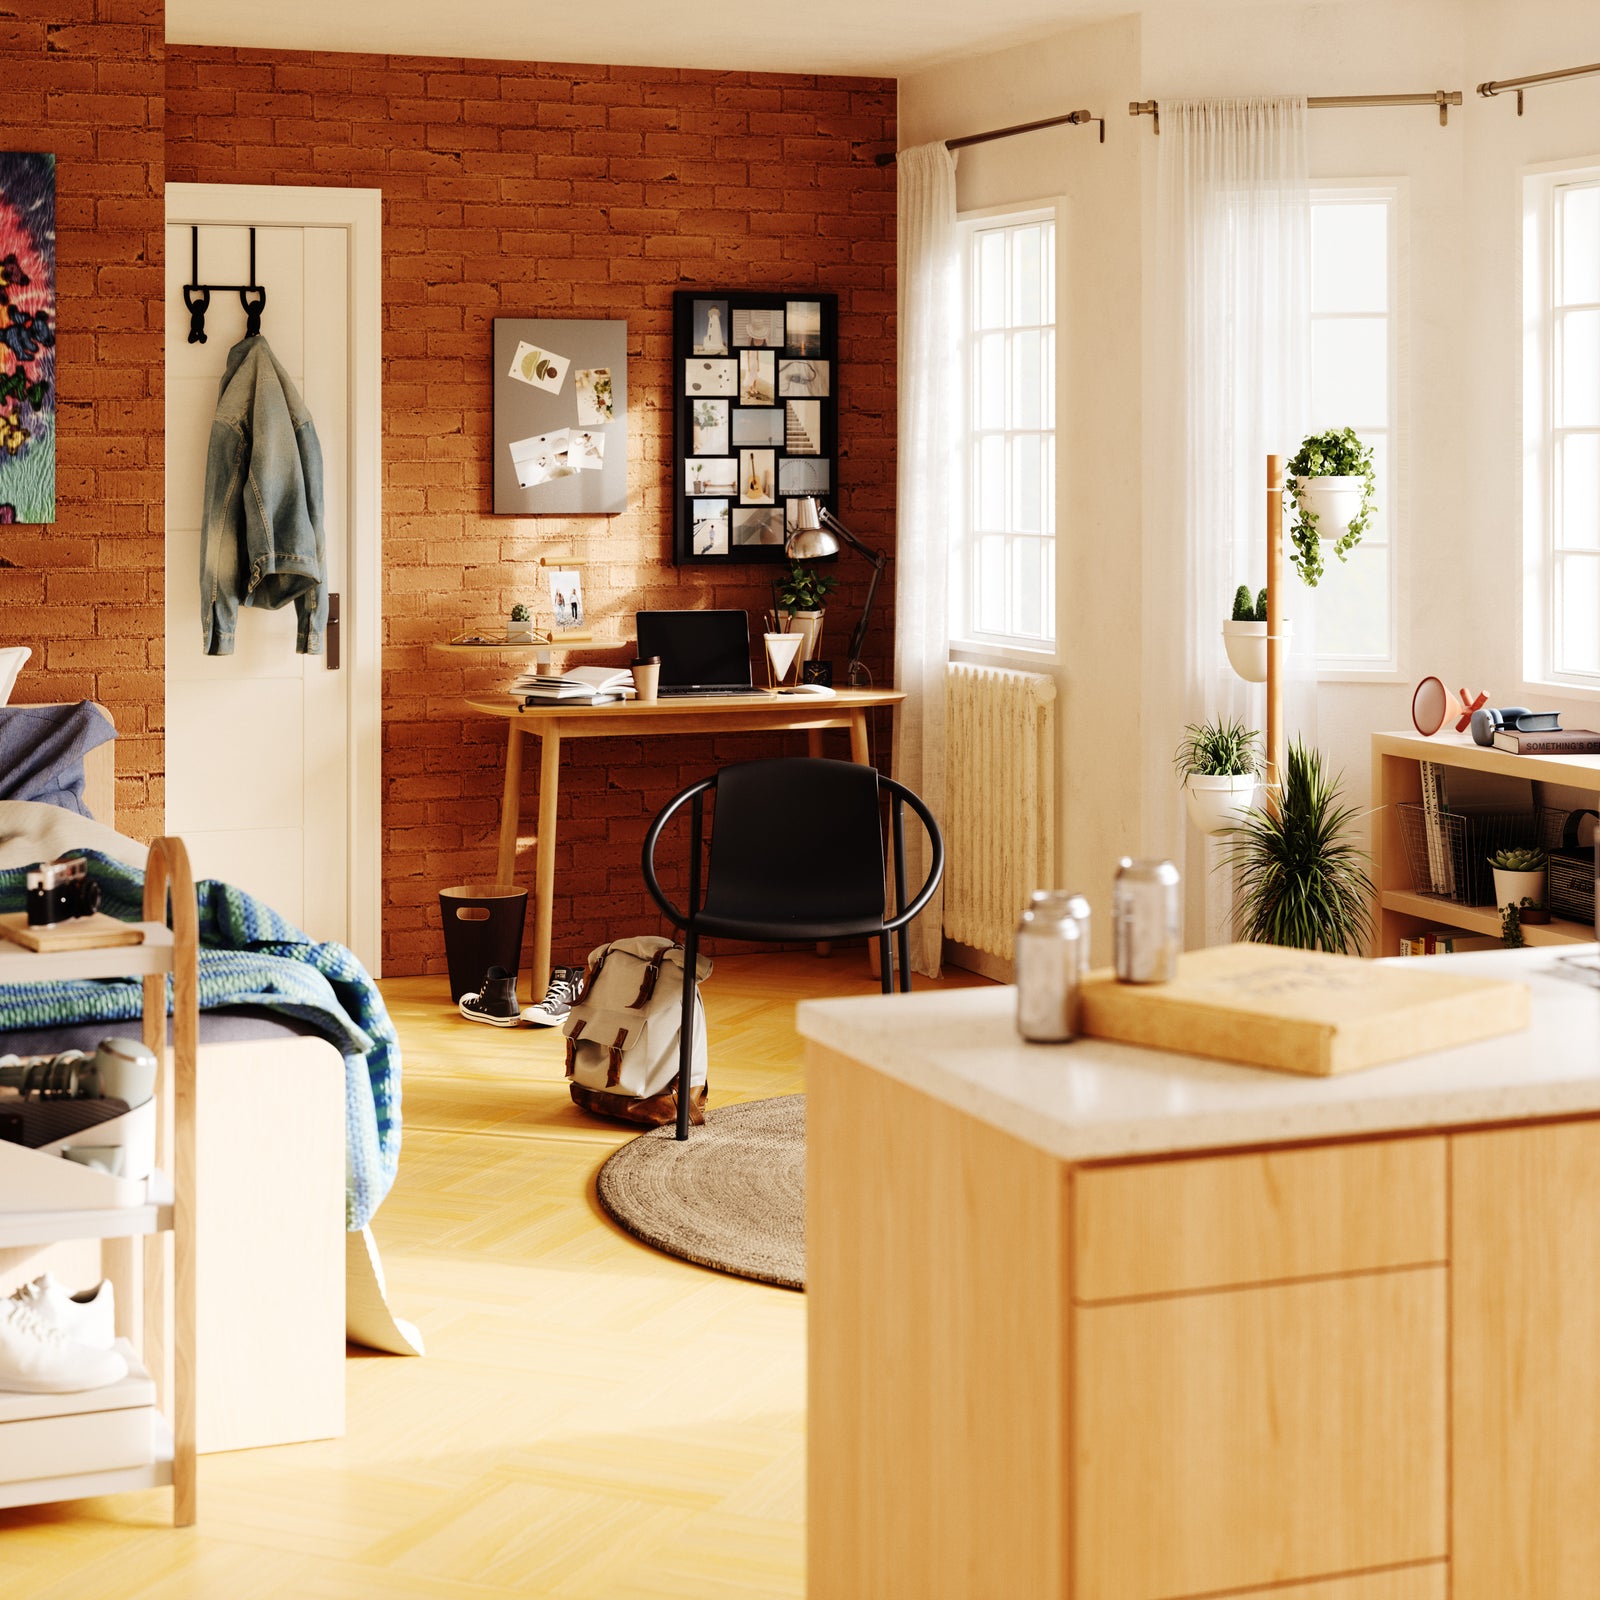 Our Off to College Favourites to Spice Up Your Dorm Room